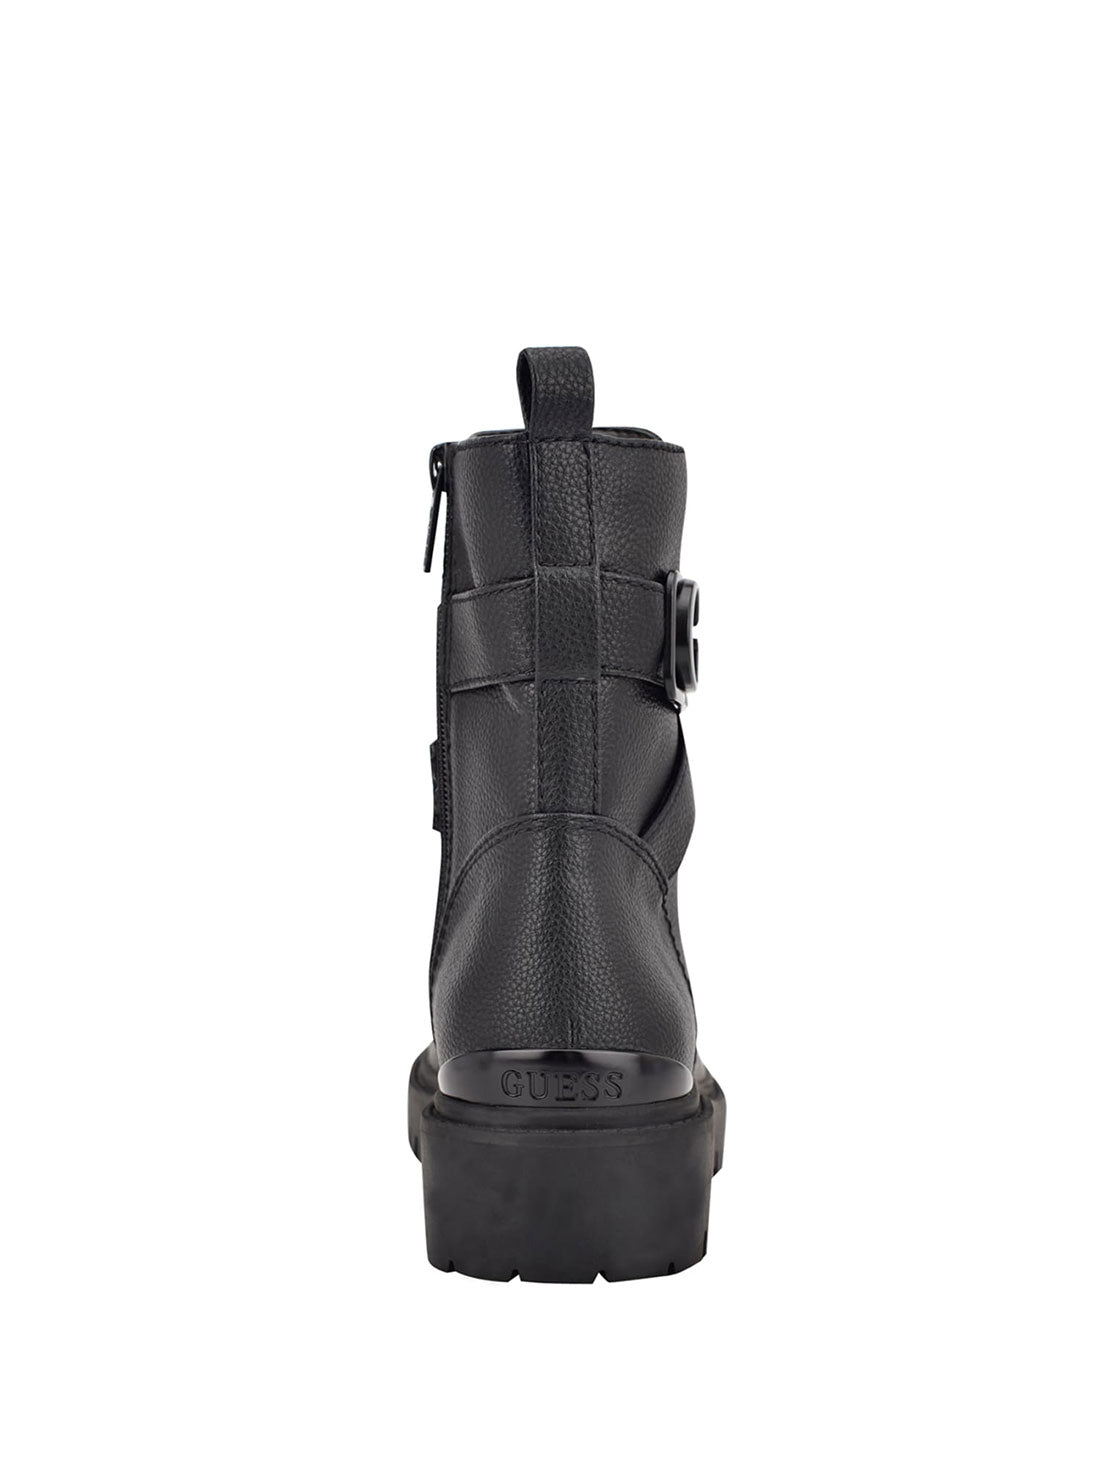 GUESS Black Orana Chunky  Combat Boots back view